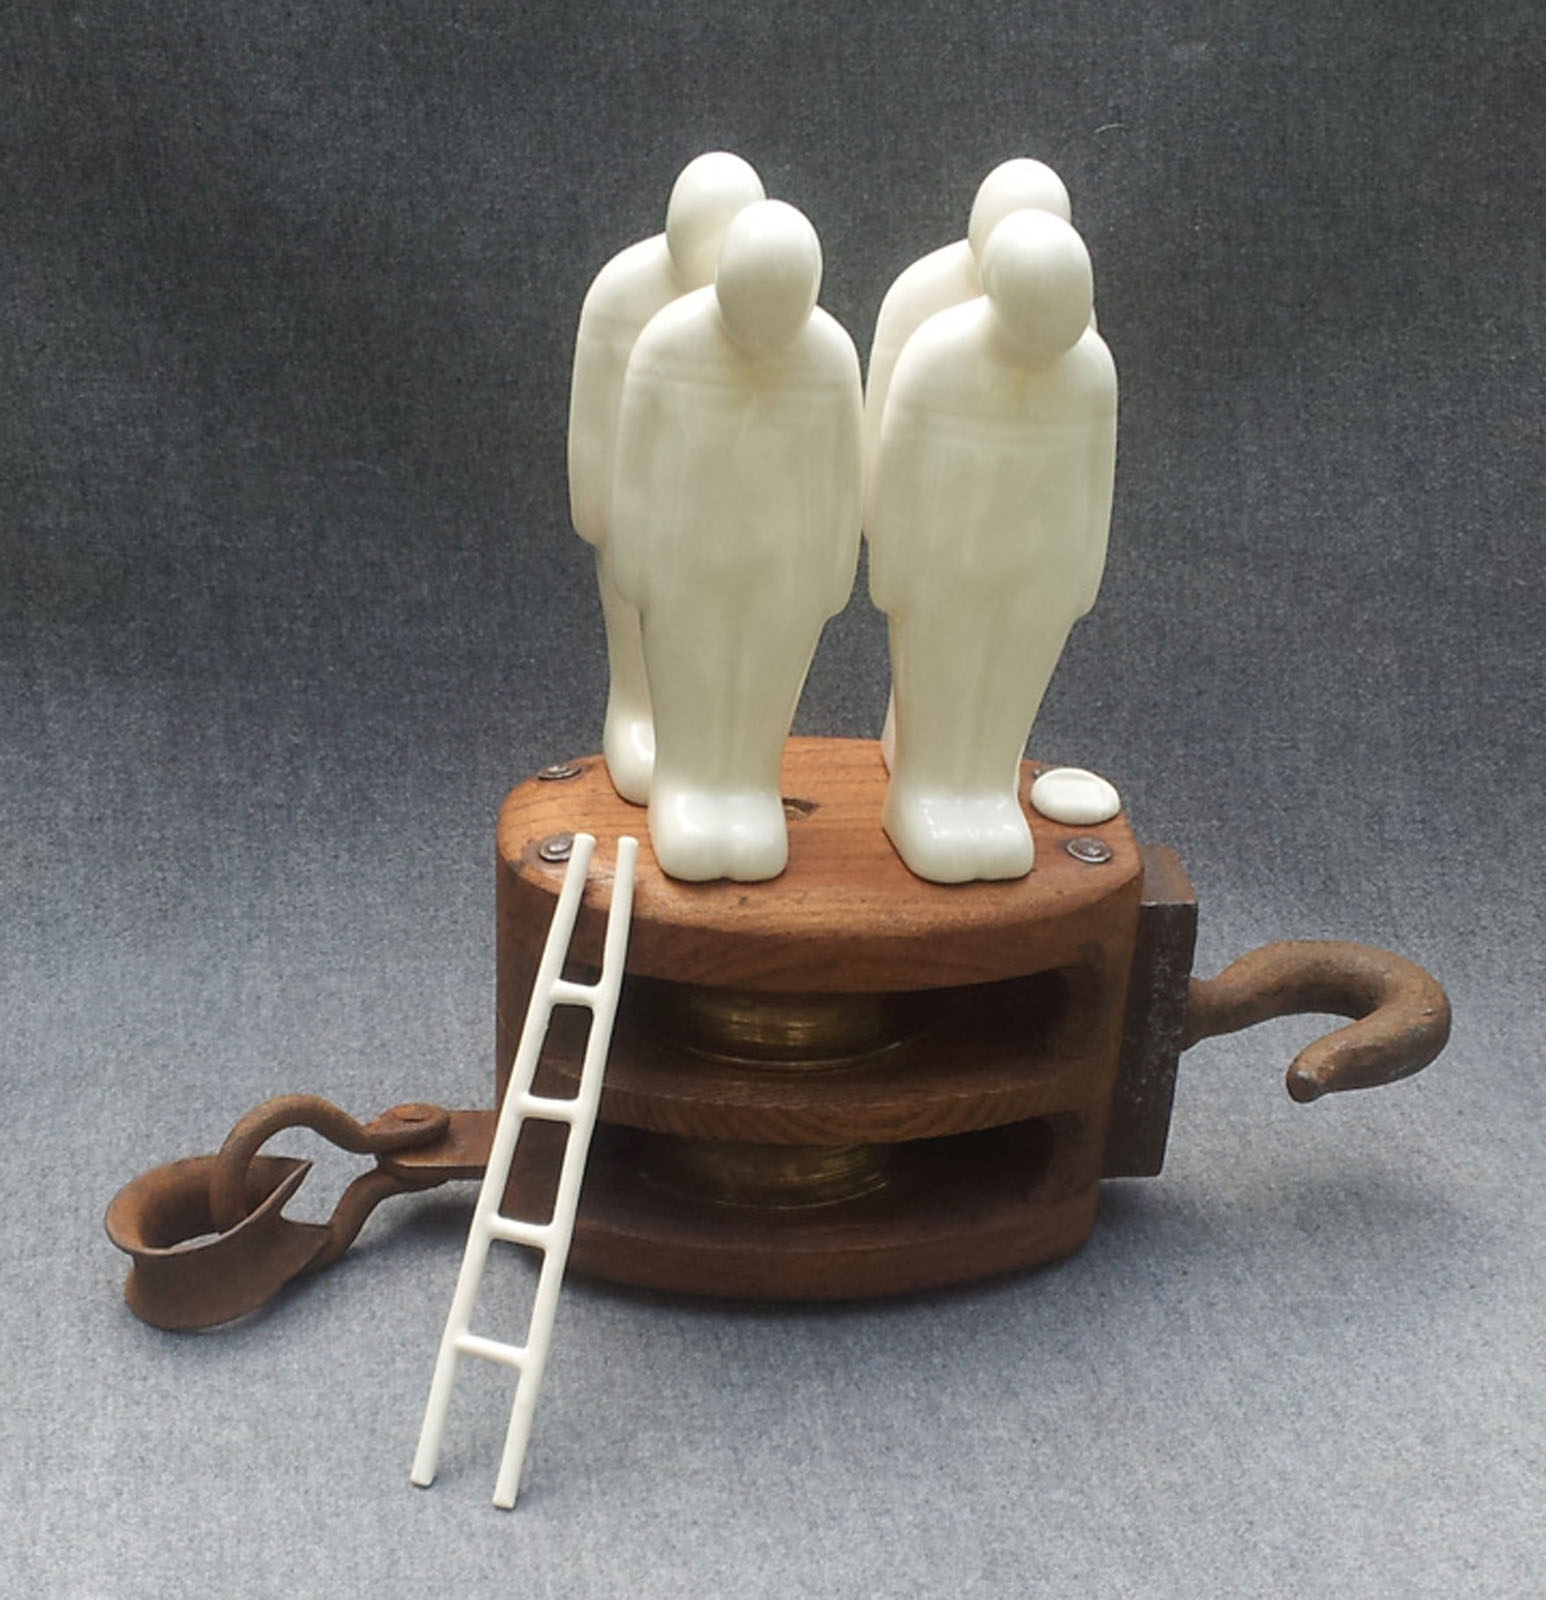 Four Figures on Pulley